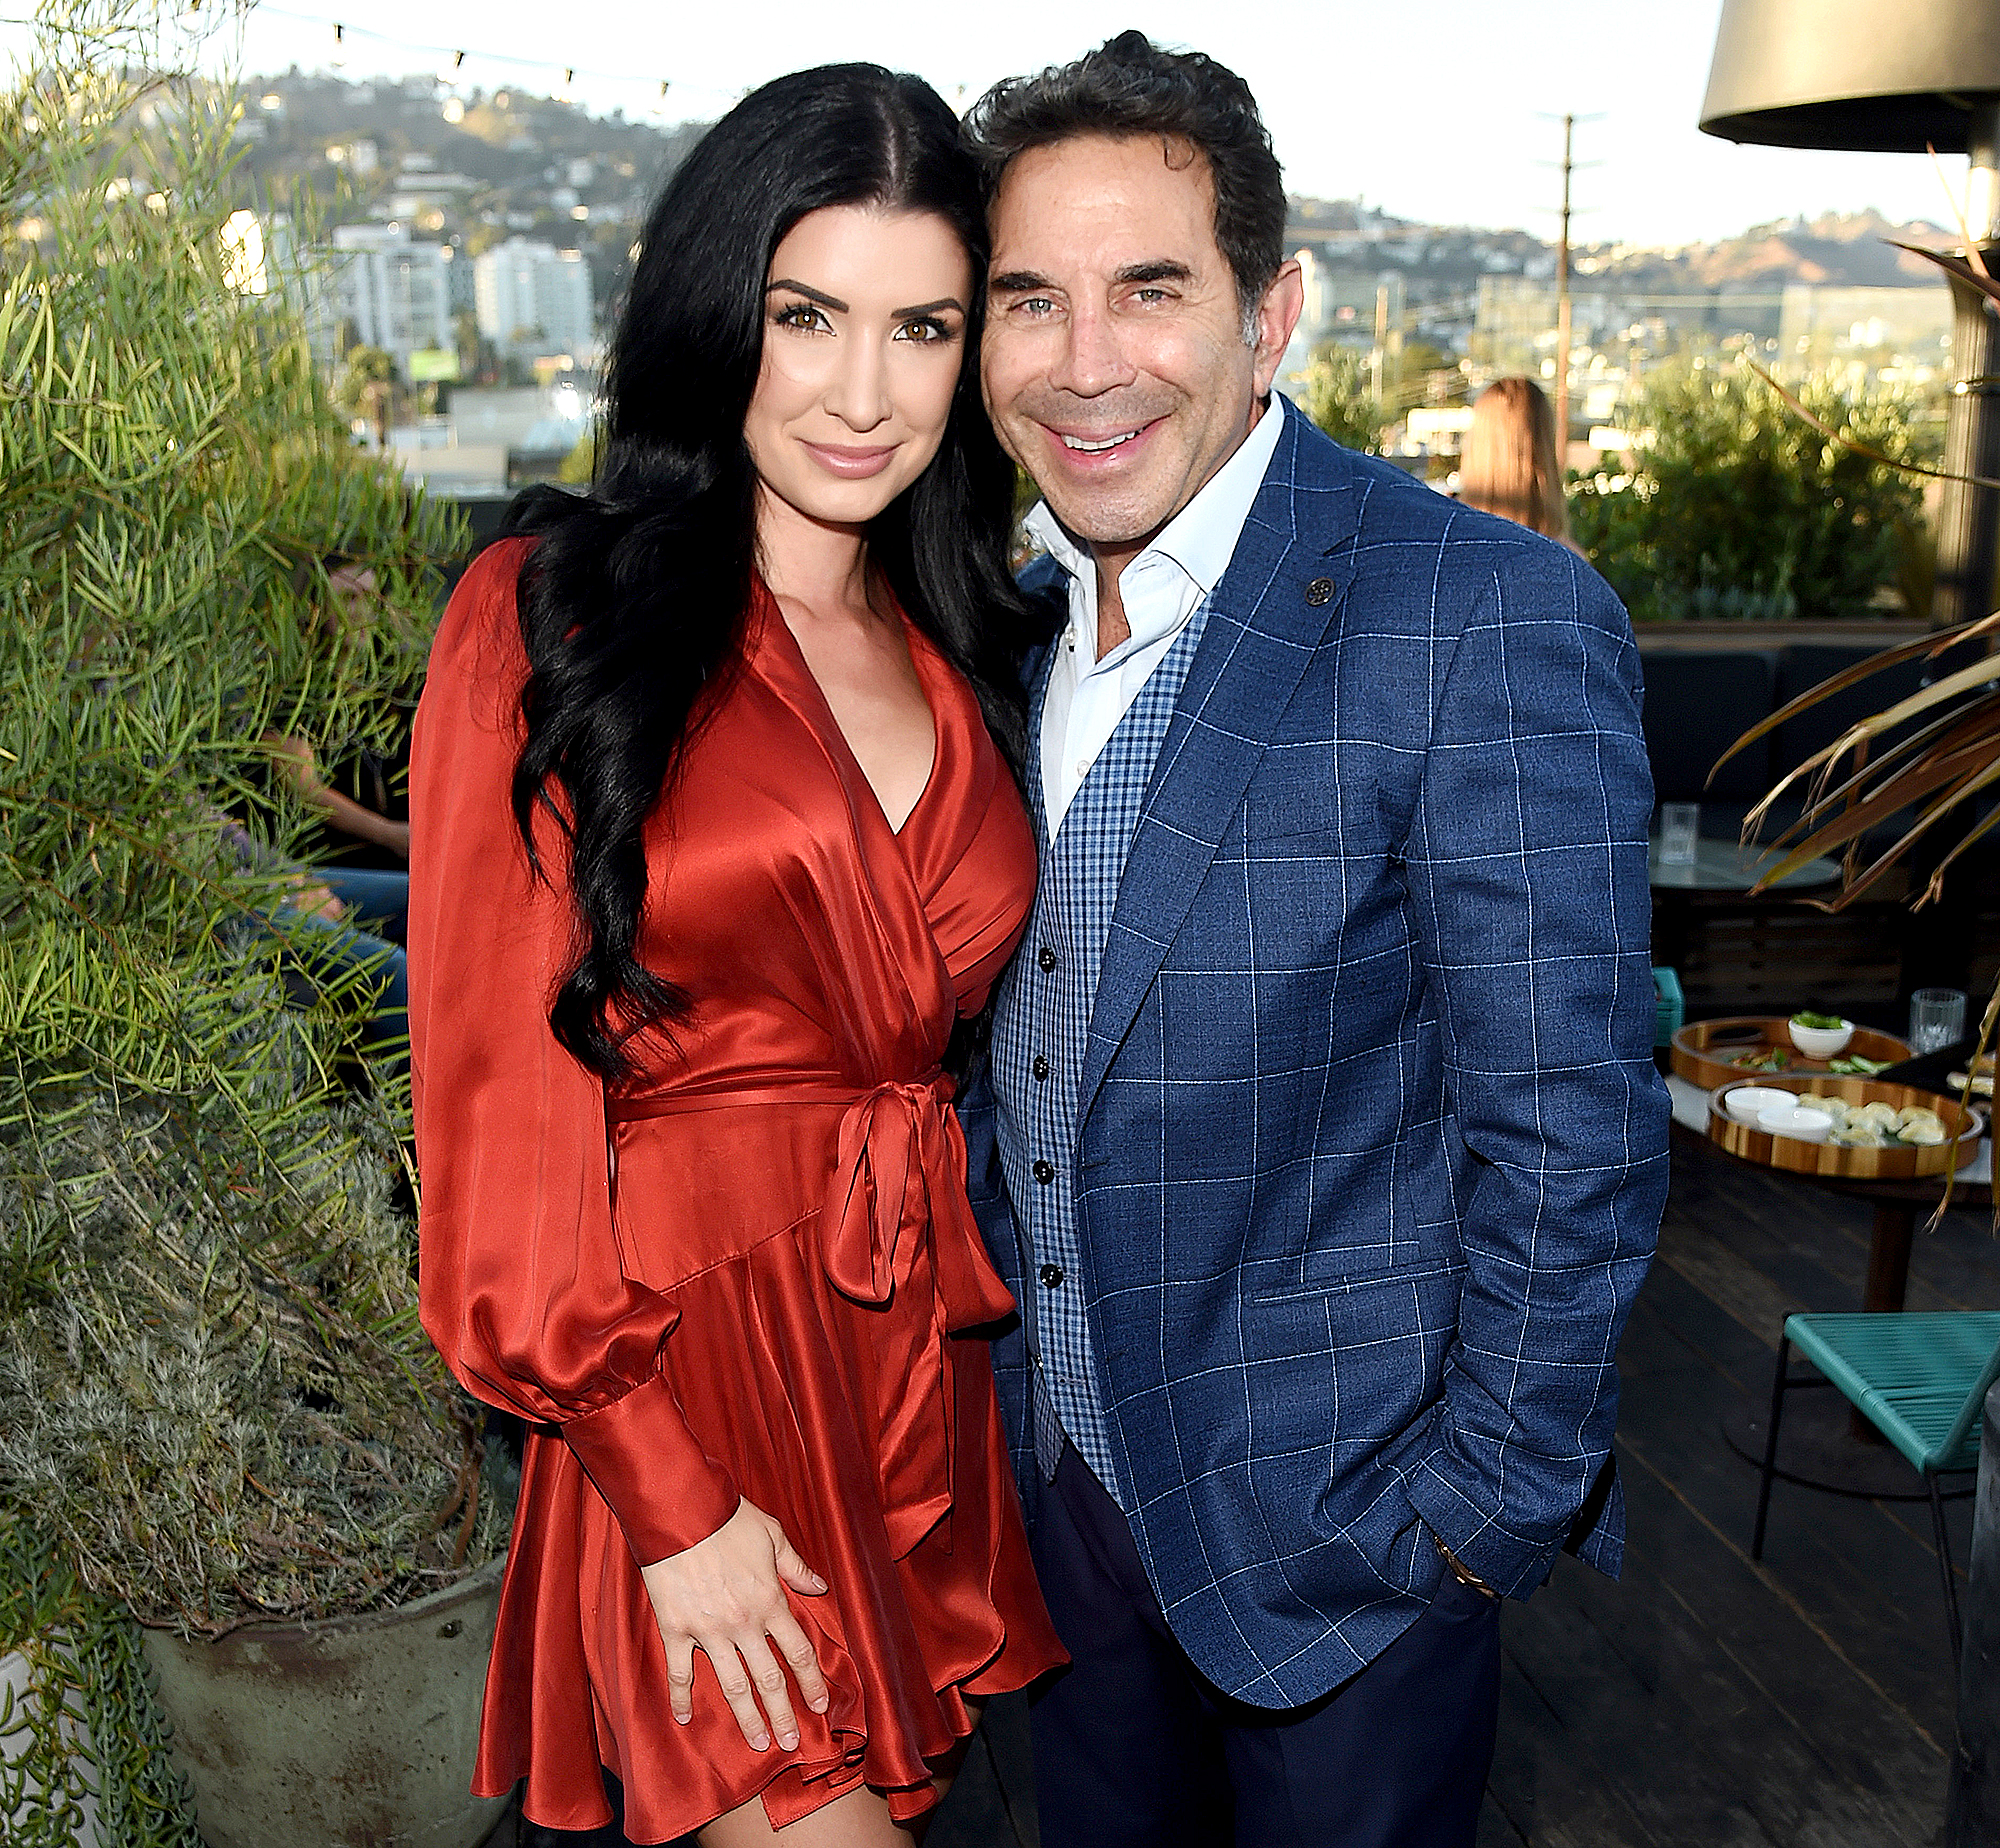 Dr. Paul Nassif, Wife Brittany Pattakos Plan on 'Expanding the Family